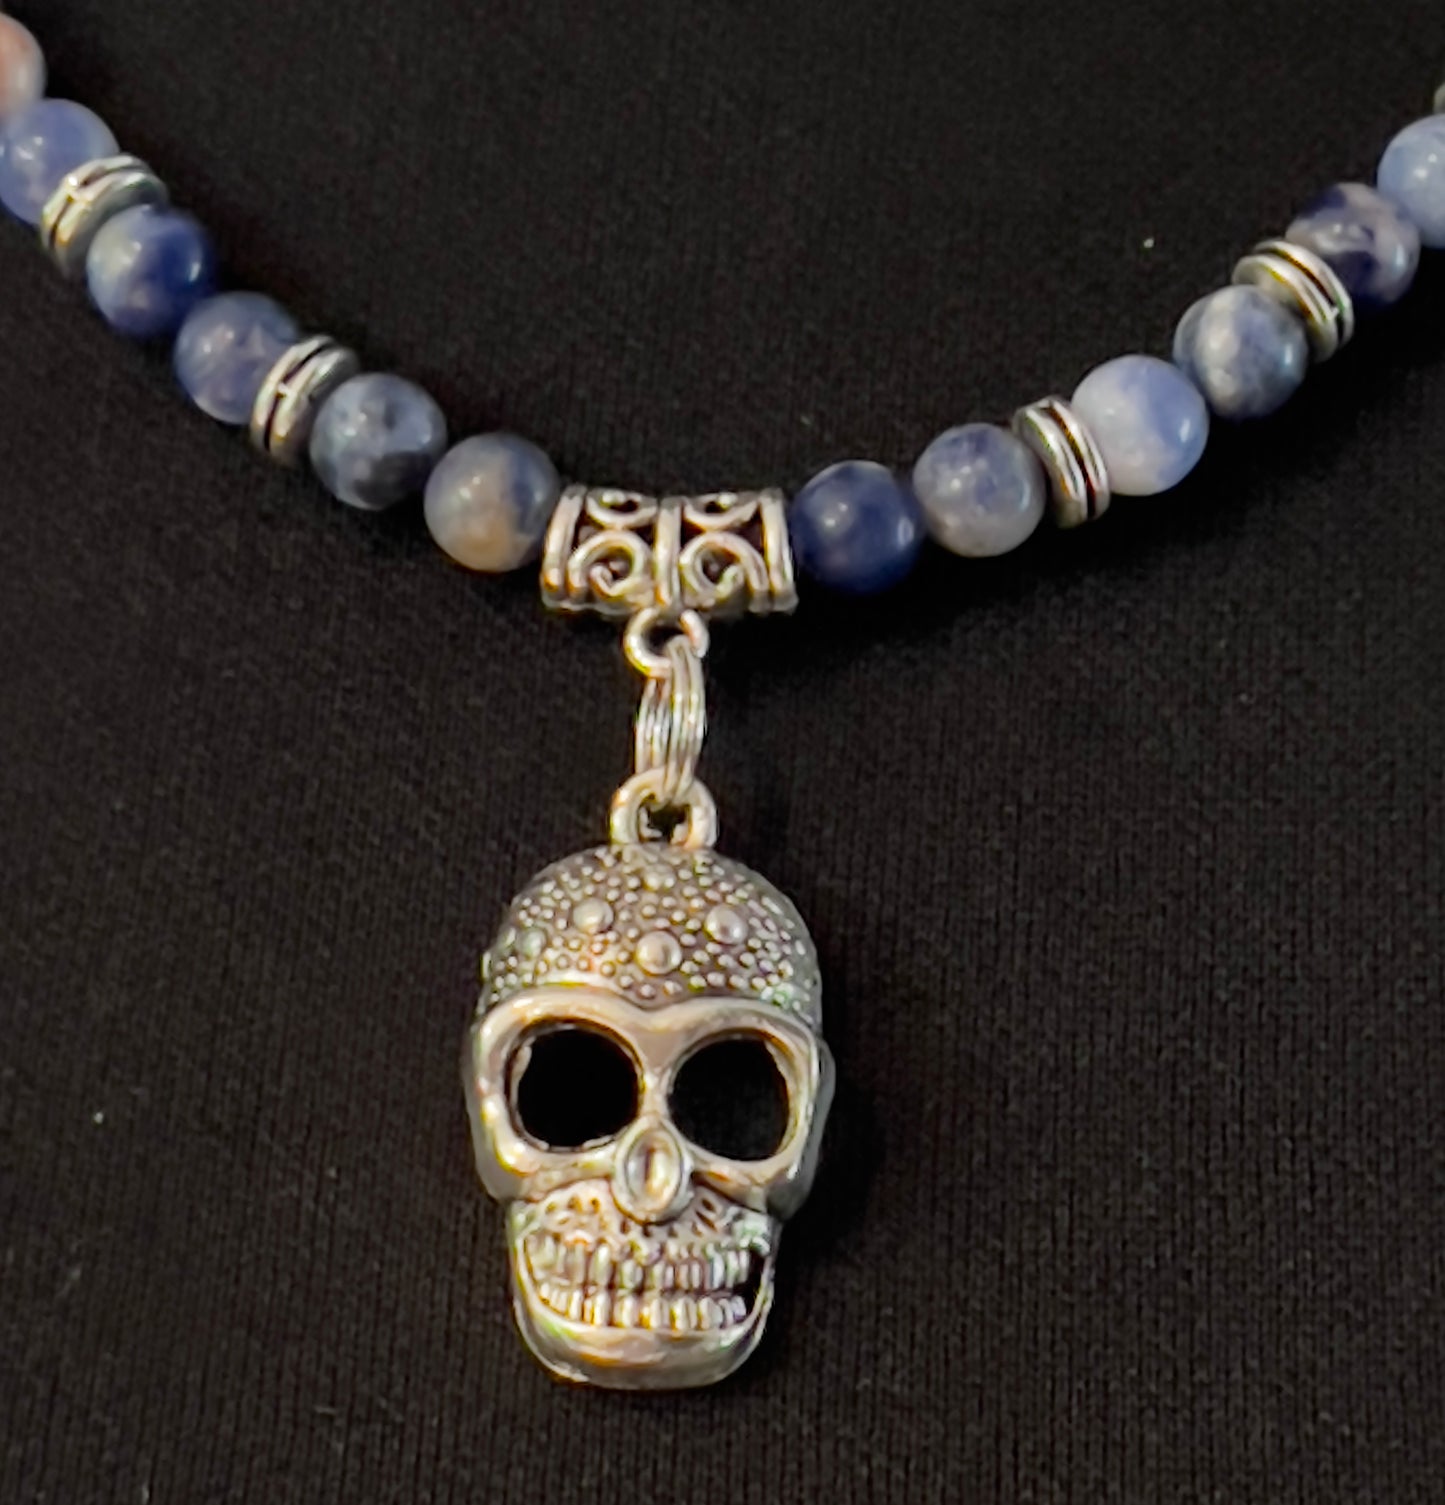 Mexican Inspired Skull Necklace with Natural Blue Sodalite Beads